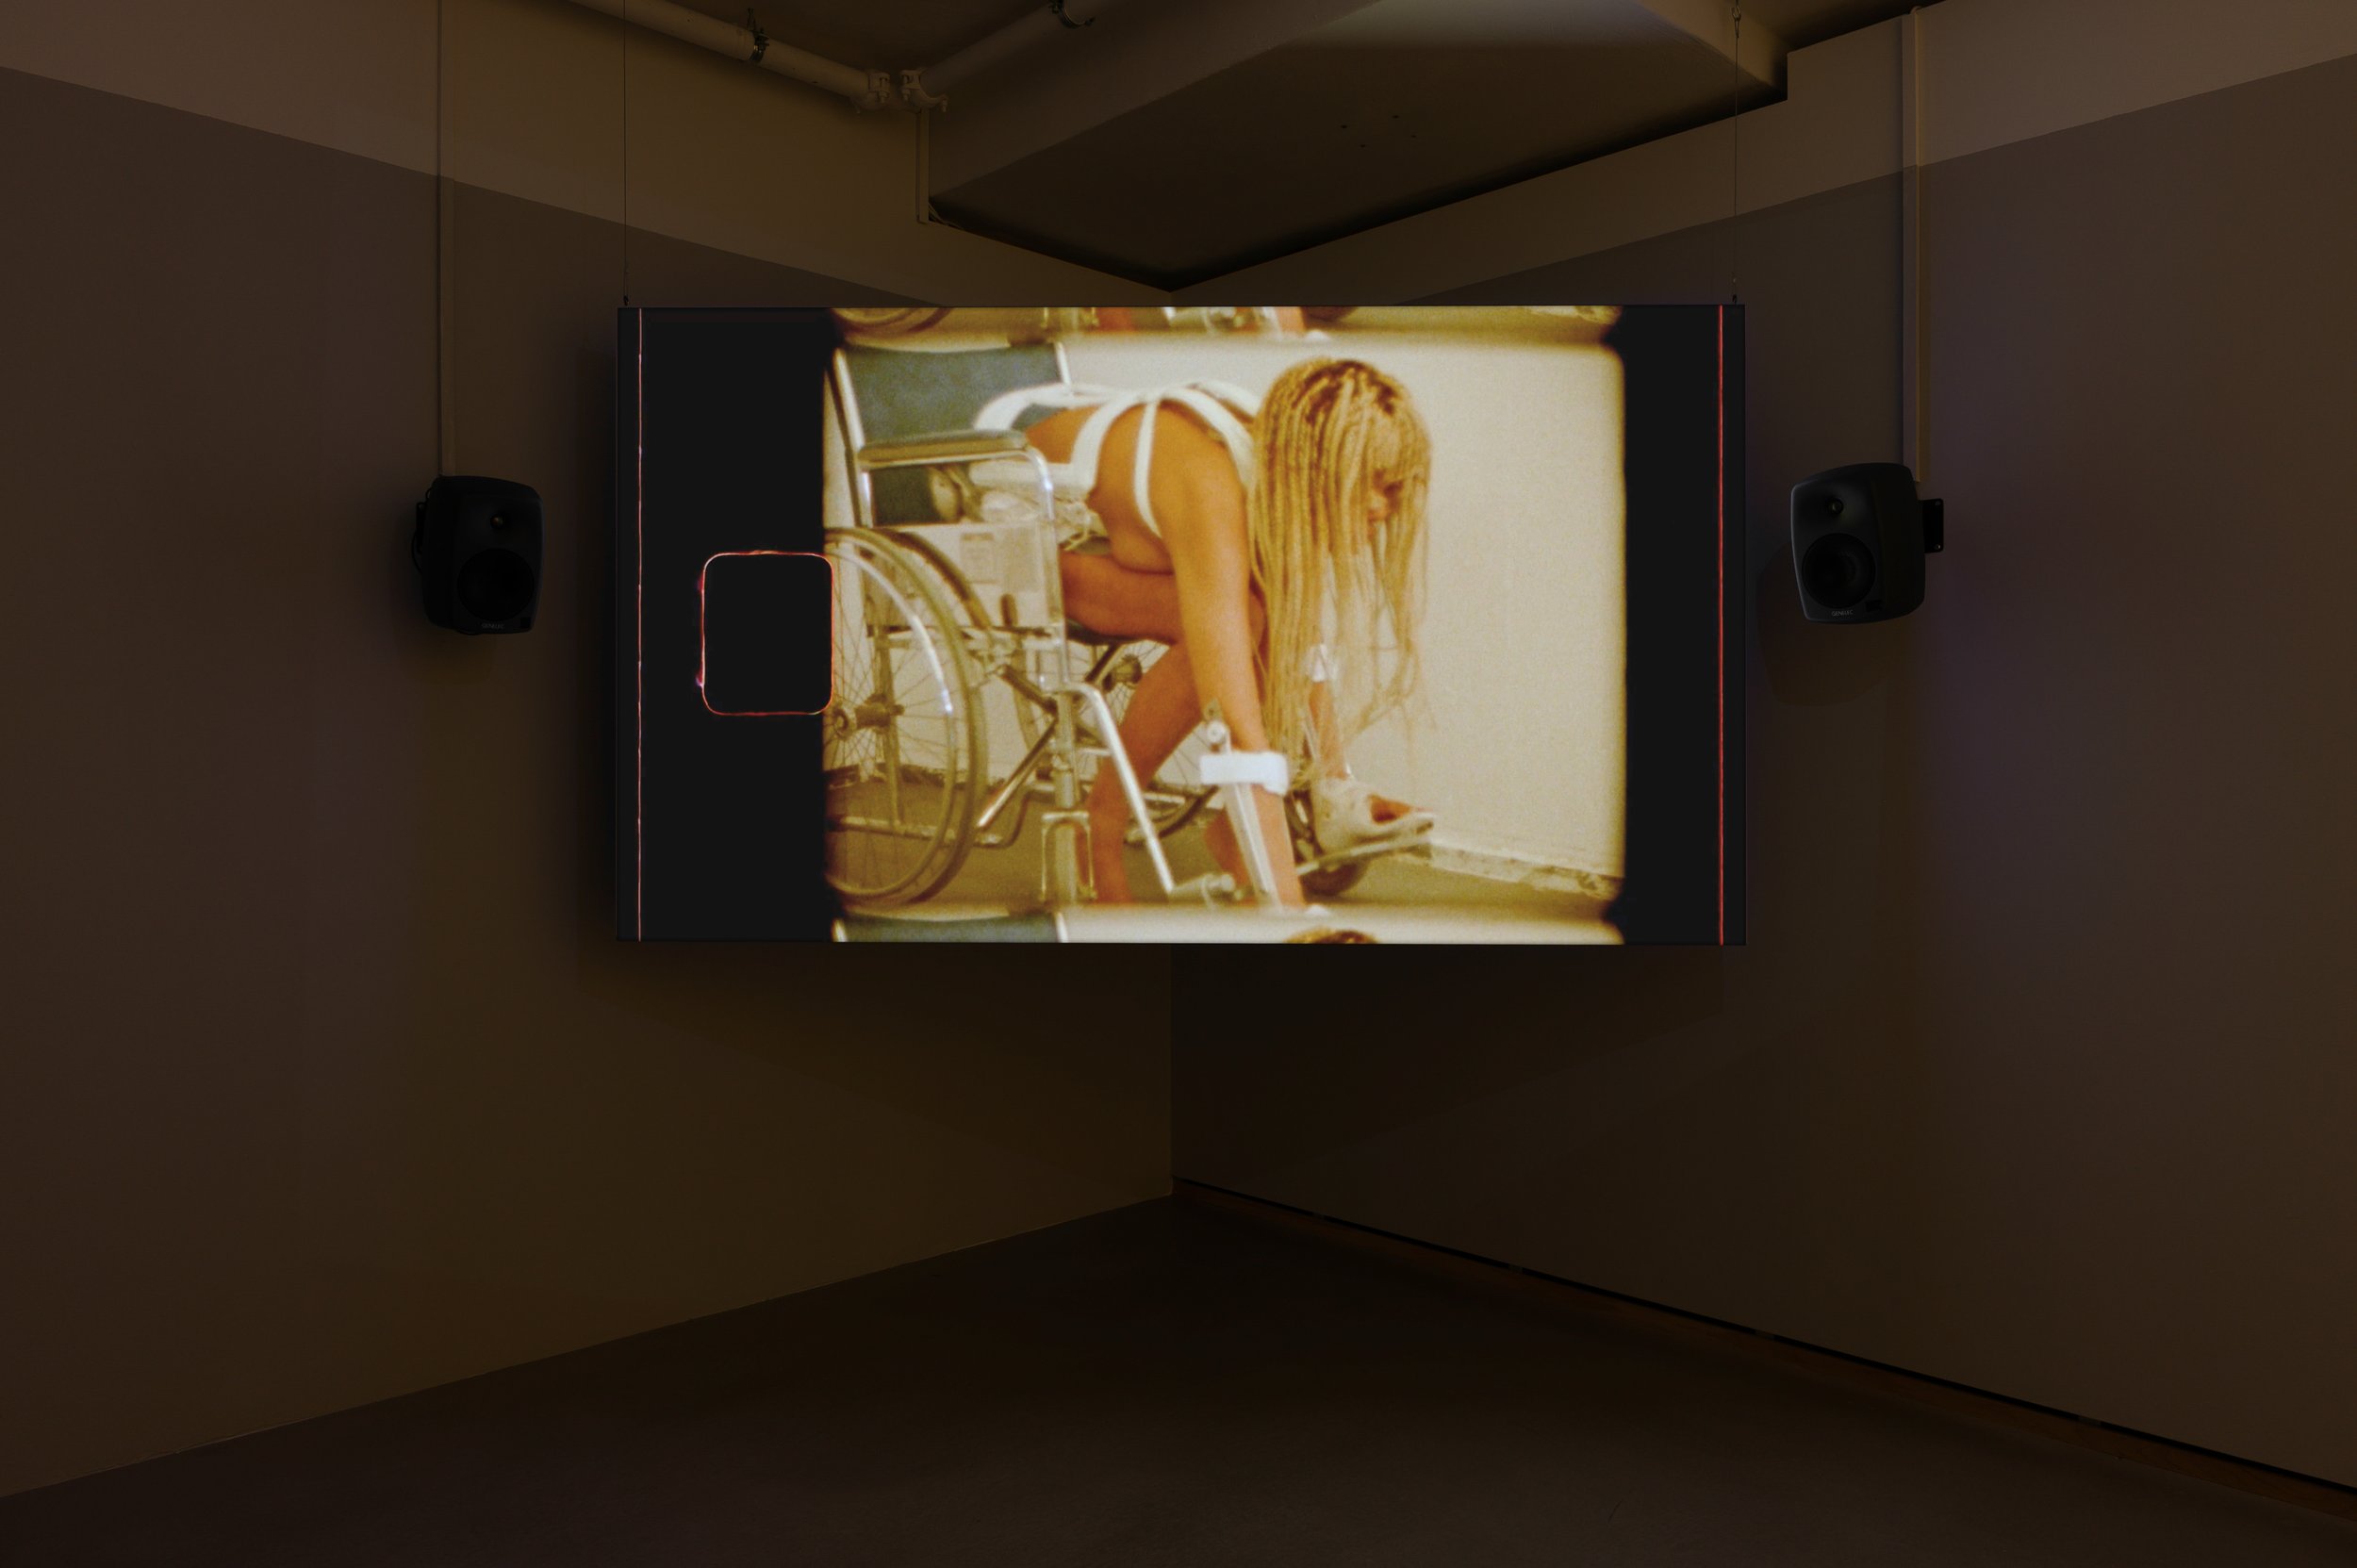 INSTALLATION VIEW: VIDEO VIEWING ROOM